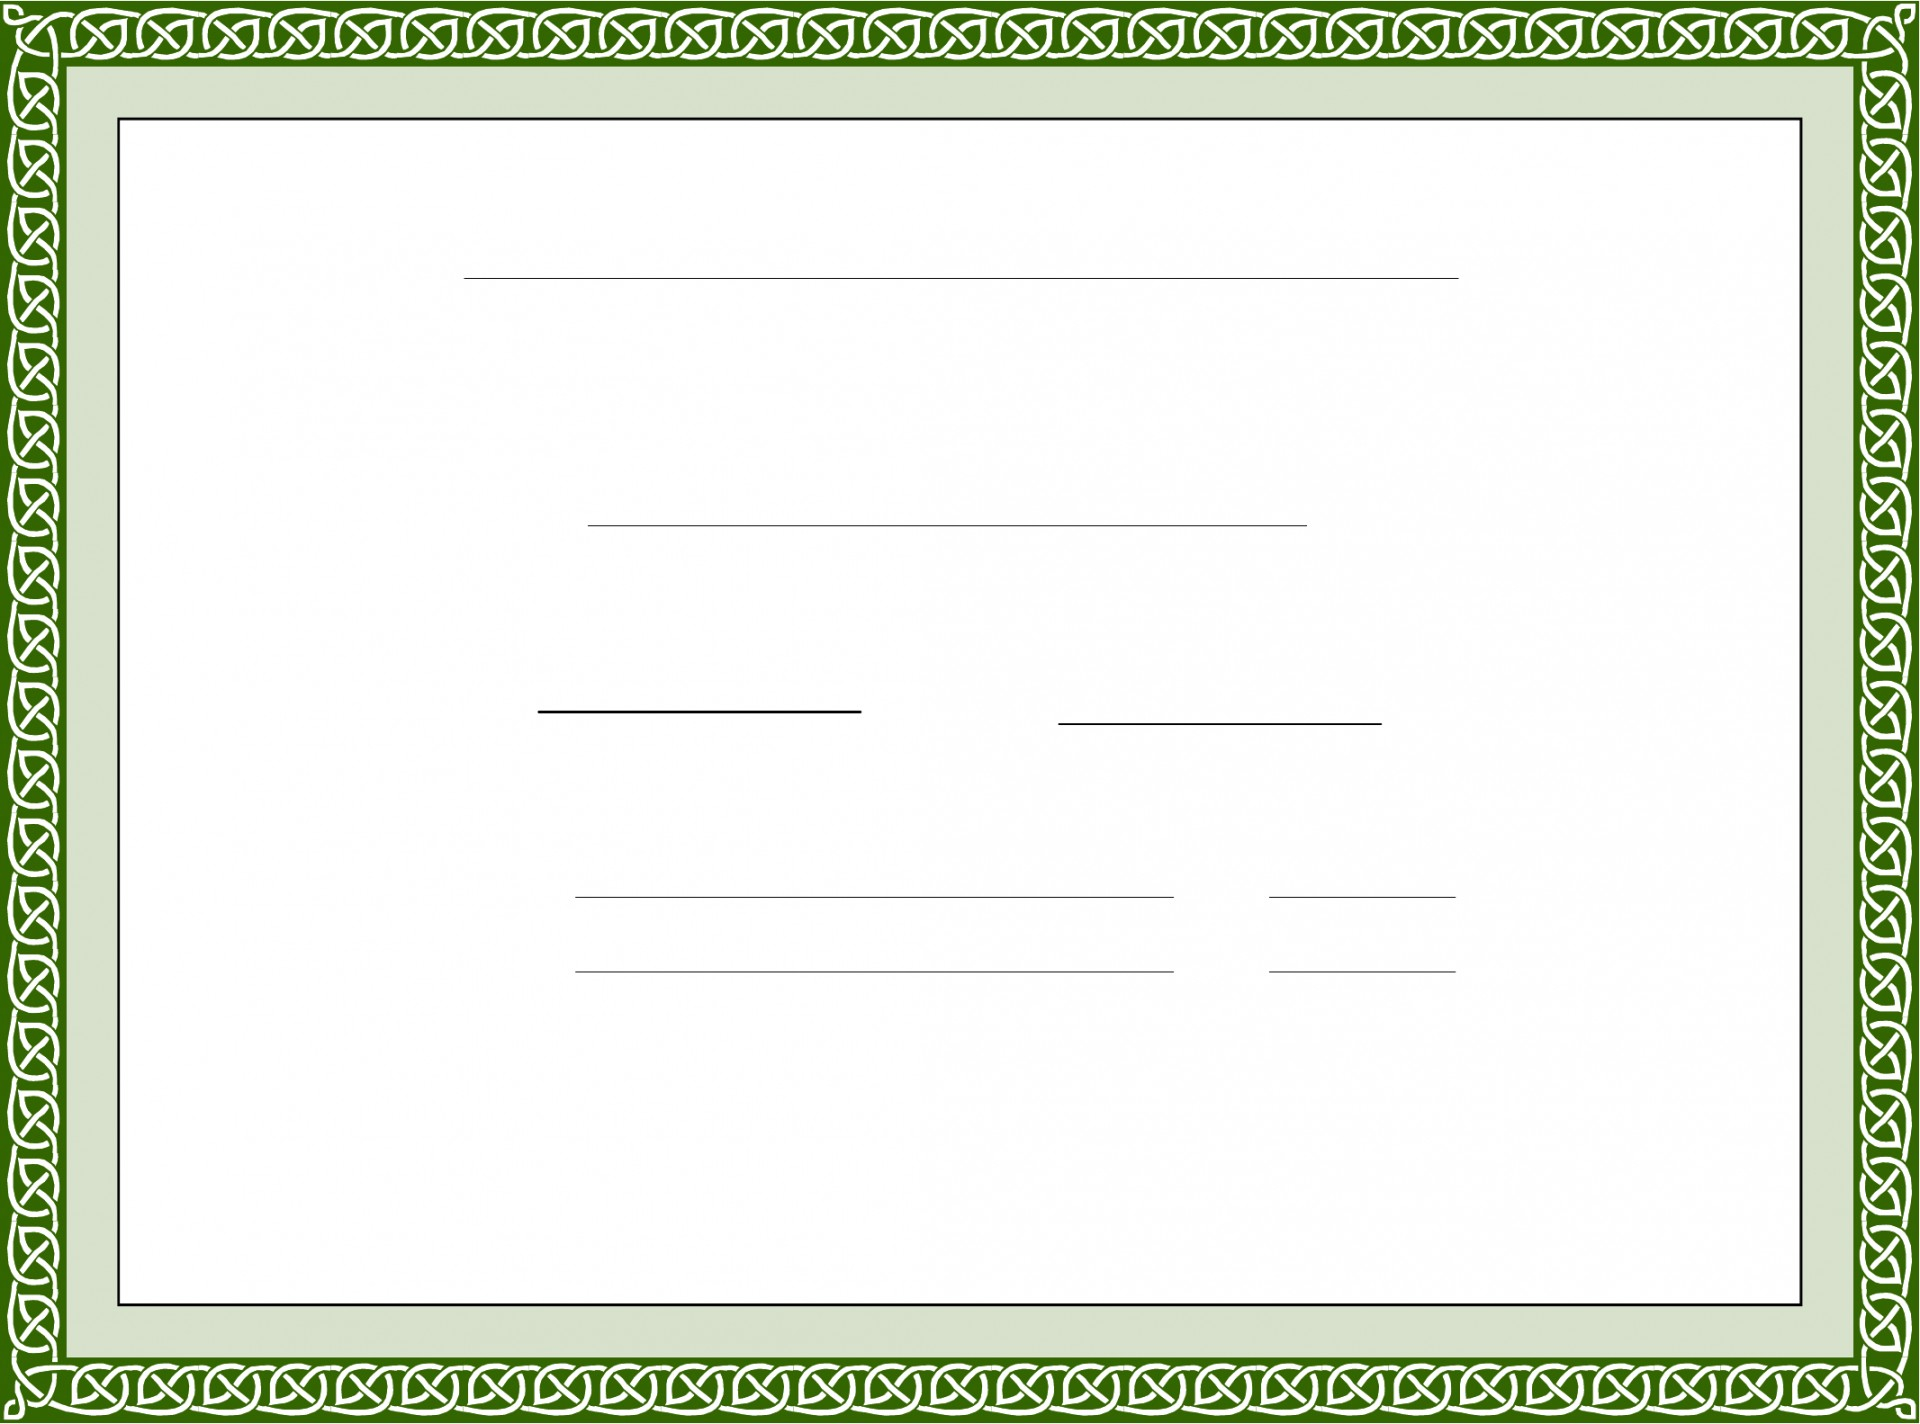 026 Template Ideas Certificates Free Gift Certificate Makes Intended For This Entitles The Bearer To Template Certificate